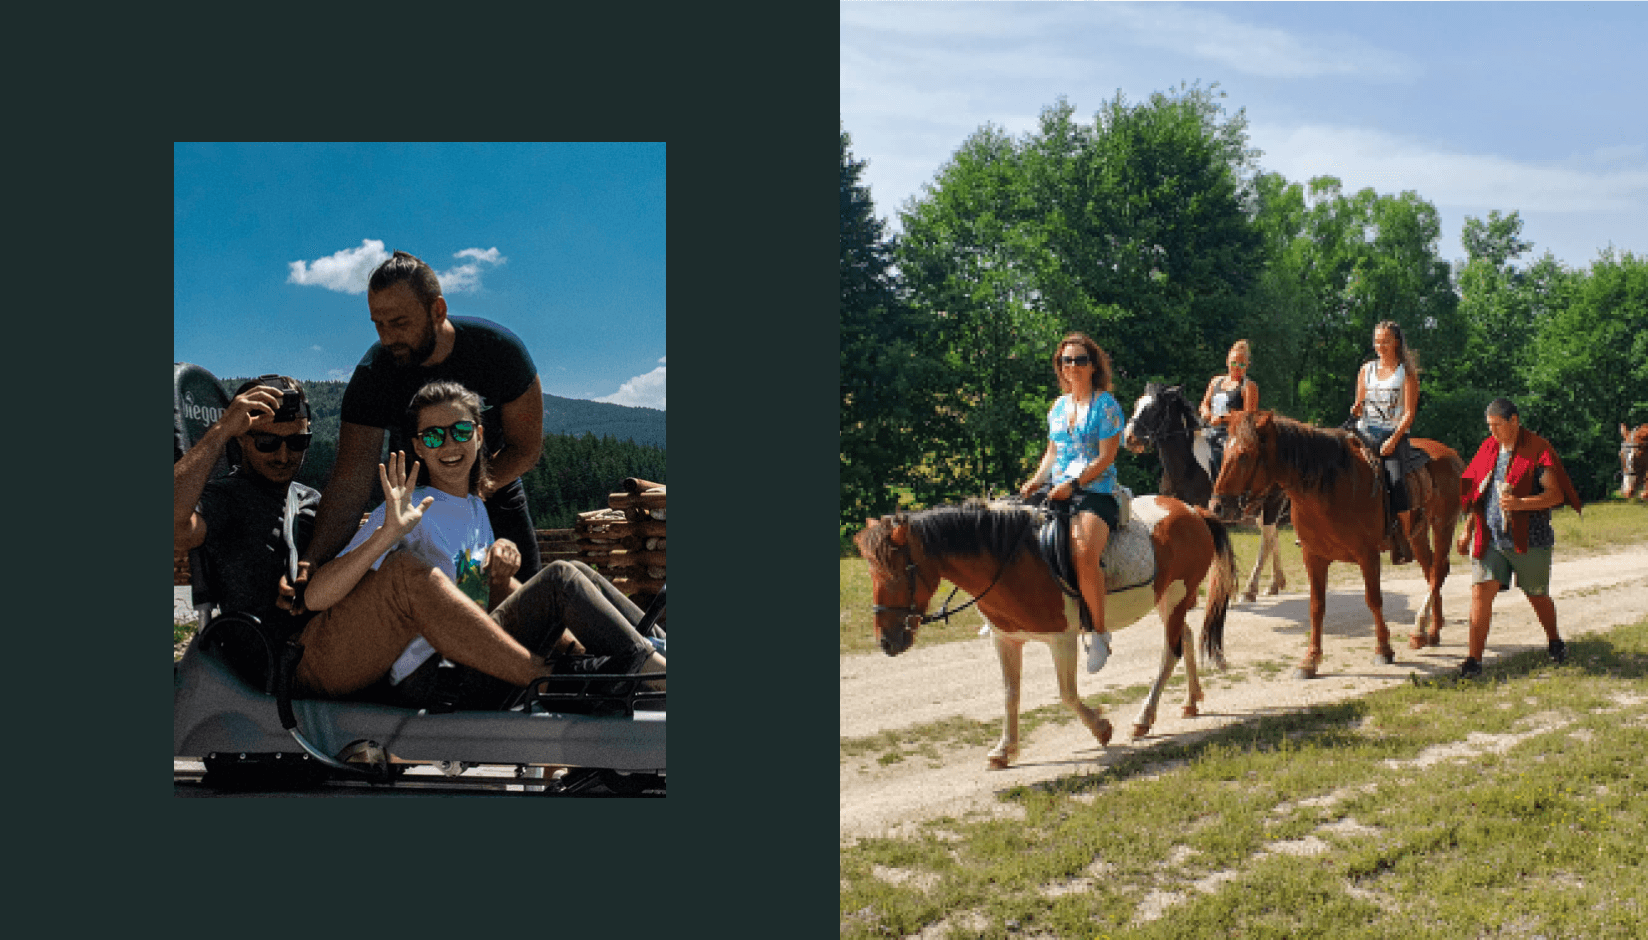 Outdoor activities at Bansko Nomad Fest